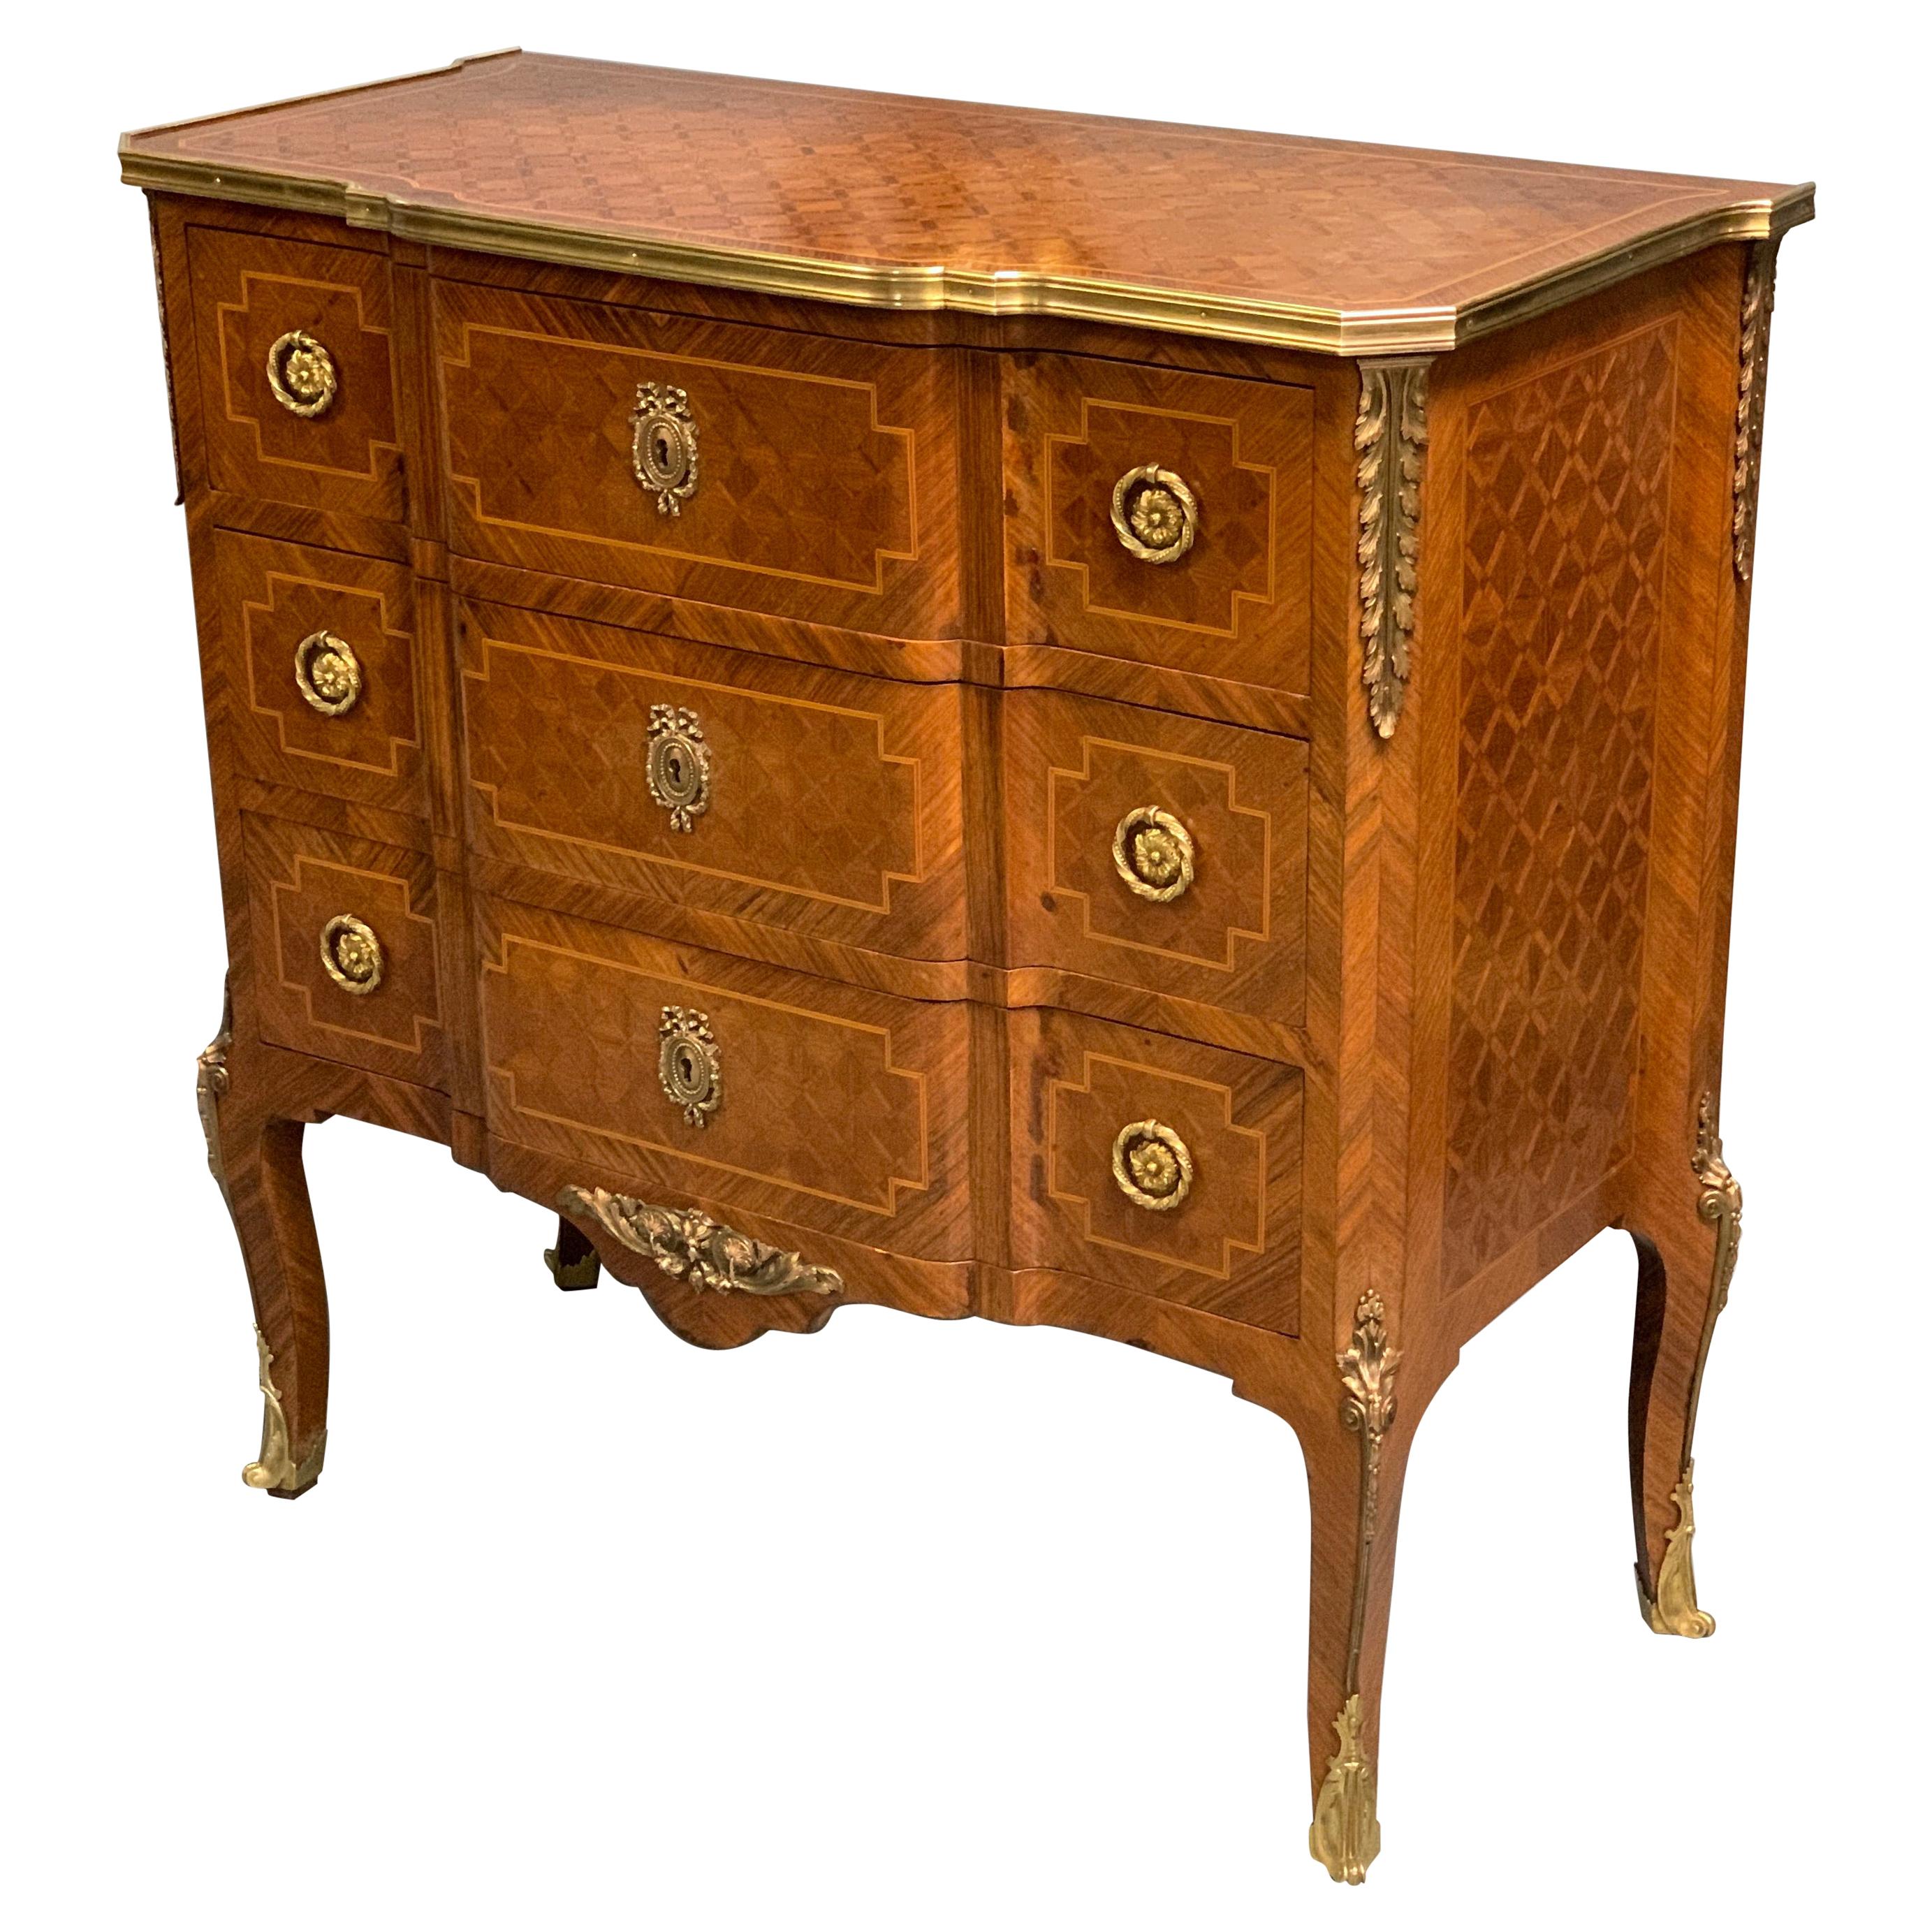 Late 19th Century French Kingwood Geometric Parquetry Chest of Drawers